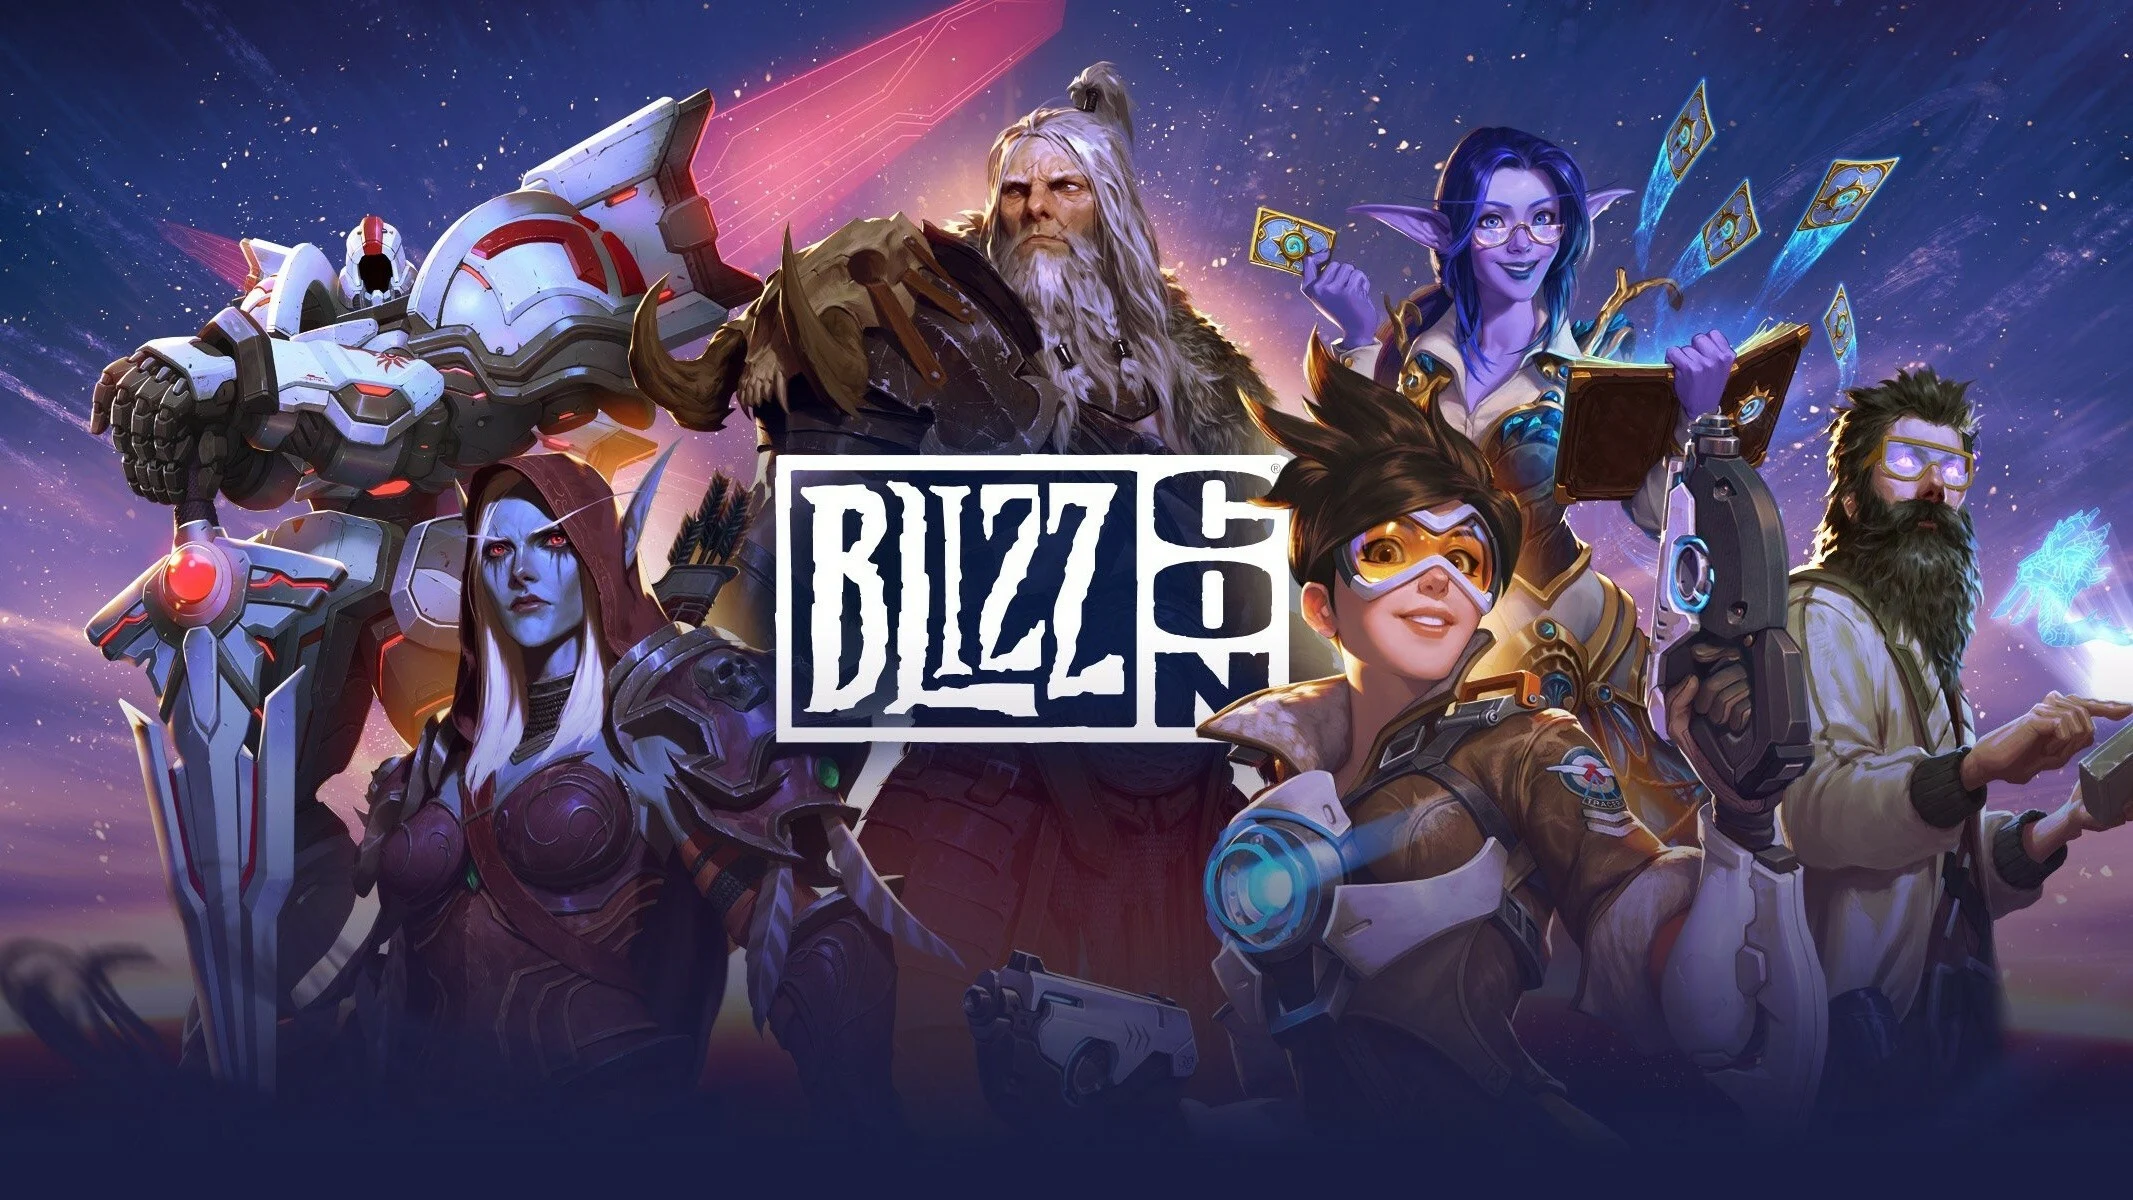 BlizzConline 2022 Has Been Canceled as Blizzard What BlizzCon Will Look Like in the Future 12